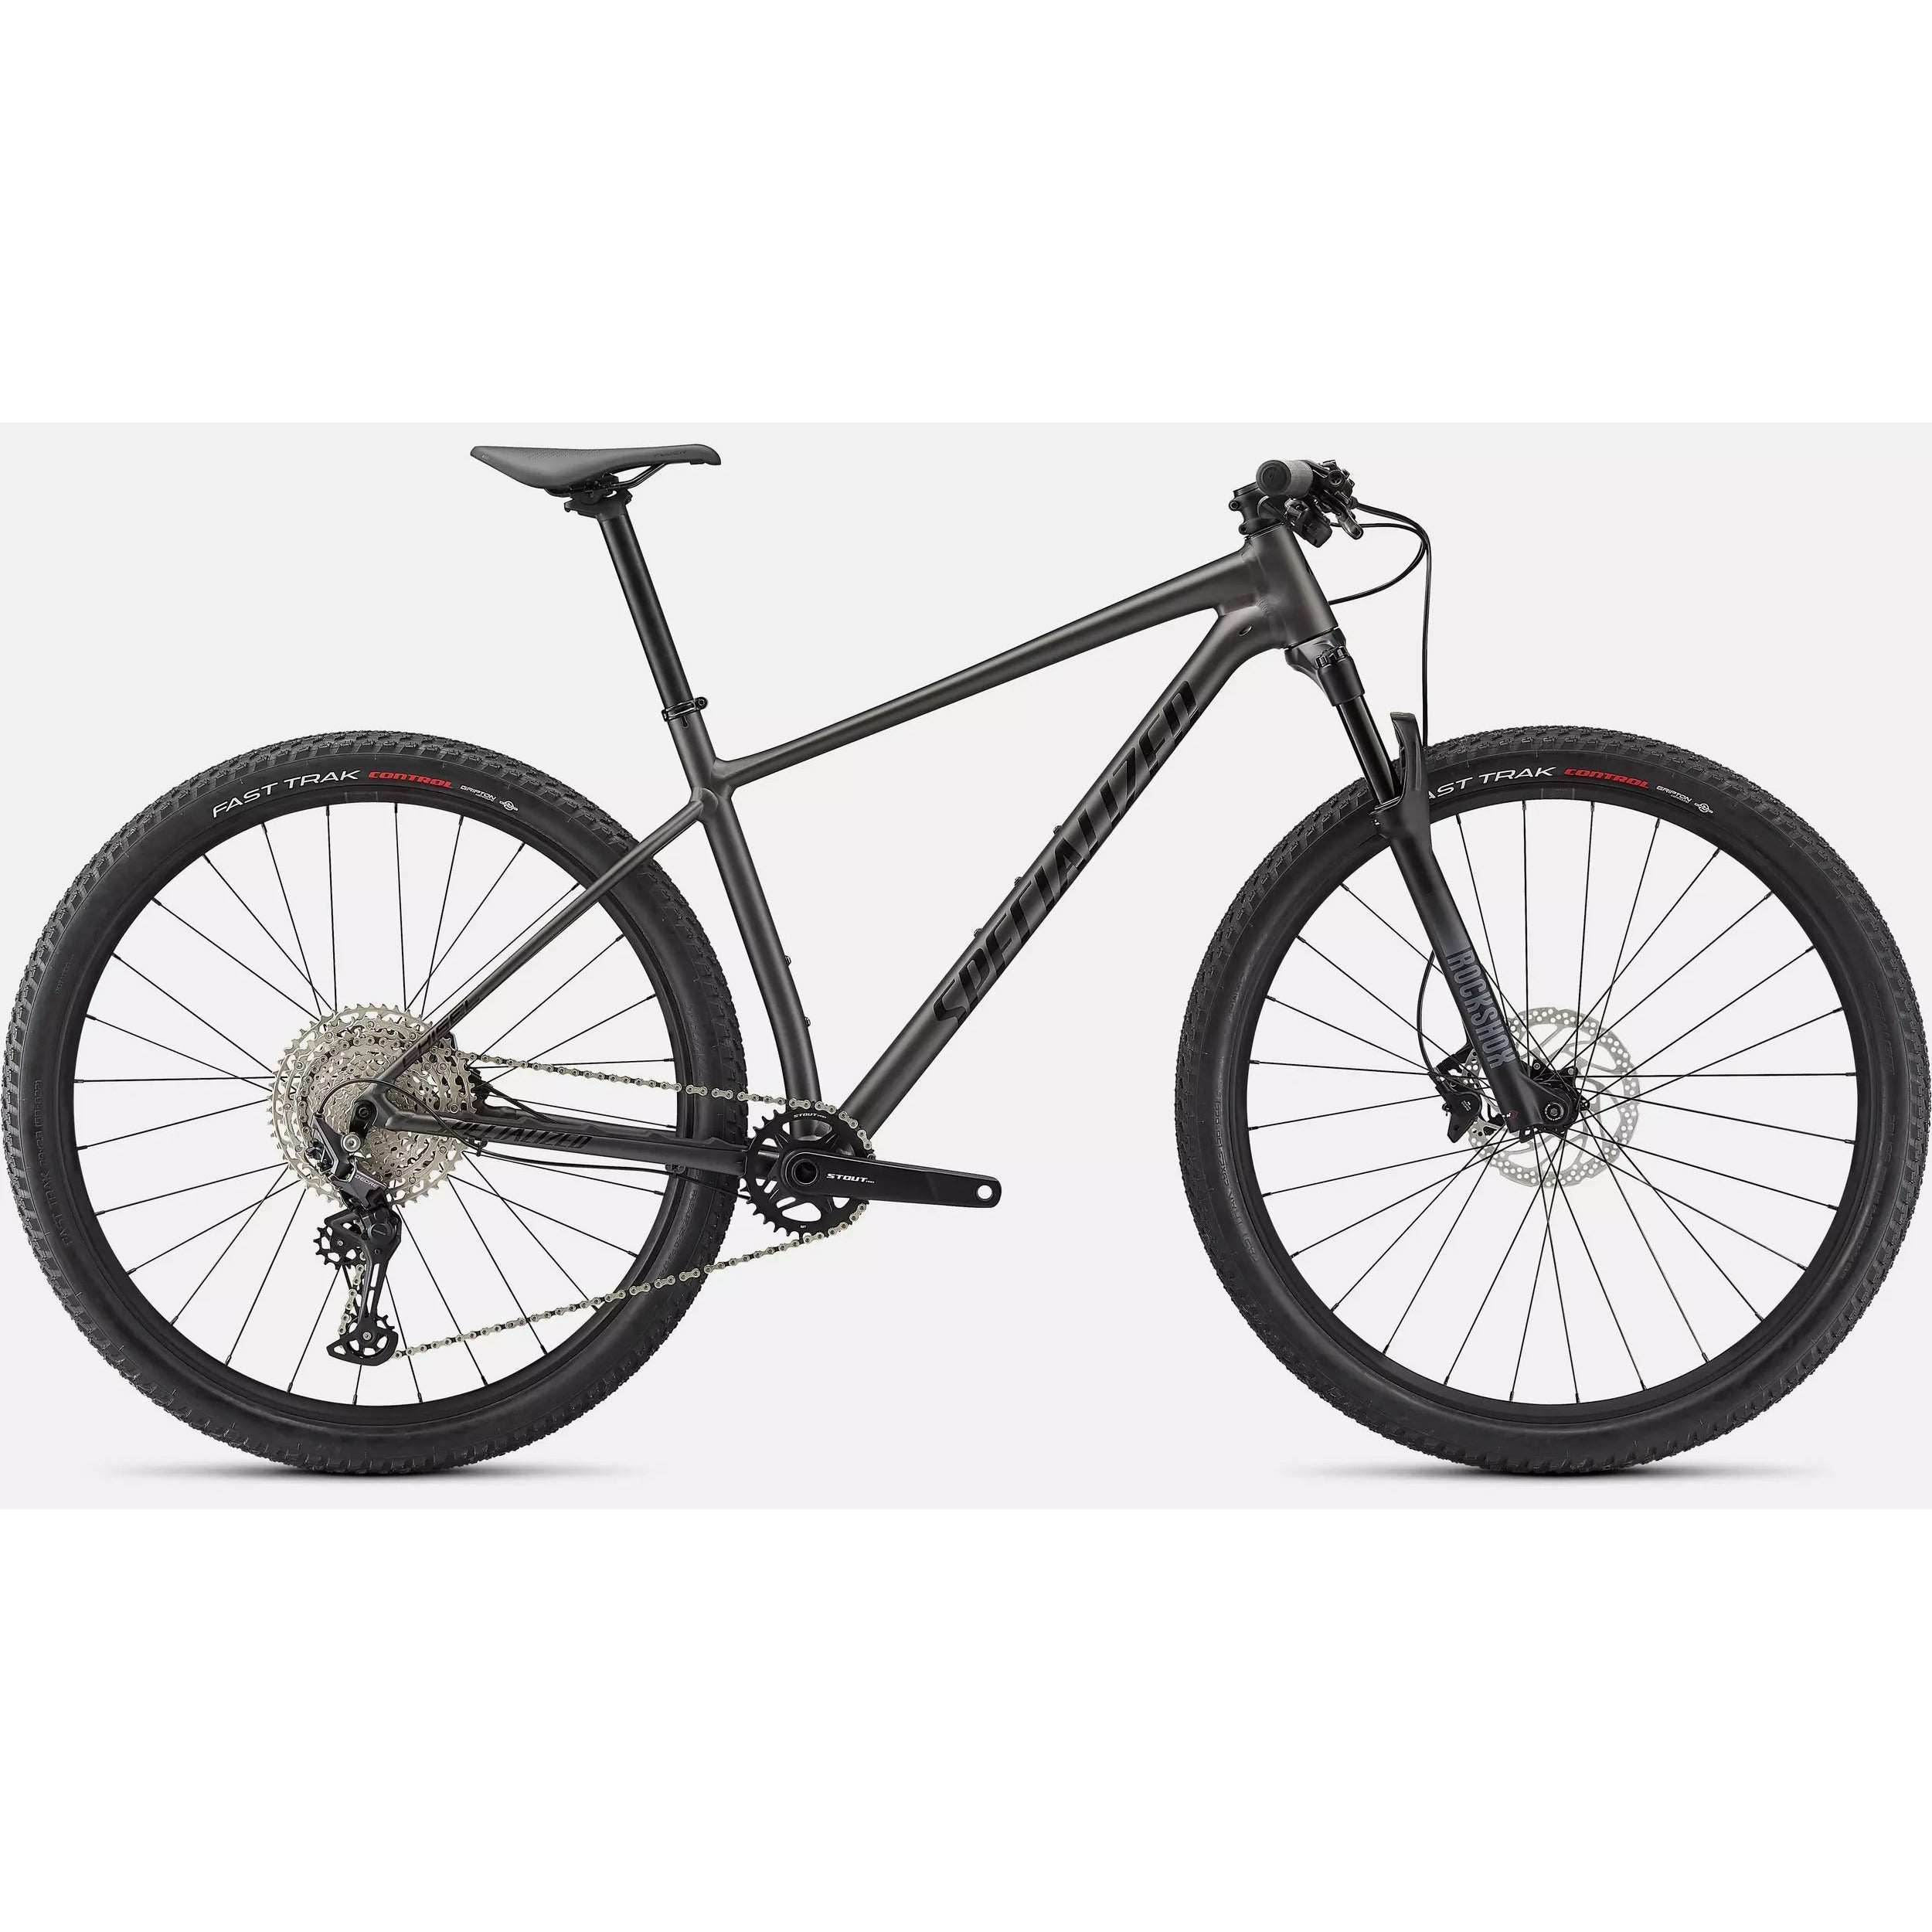 2021 Specialized Chisel Hardtail Disc Mountain Bike